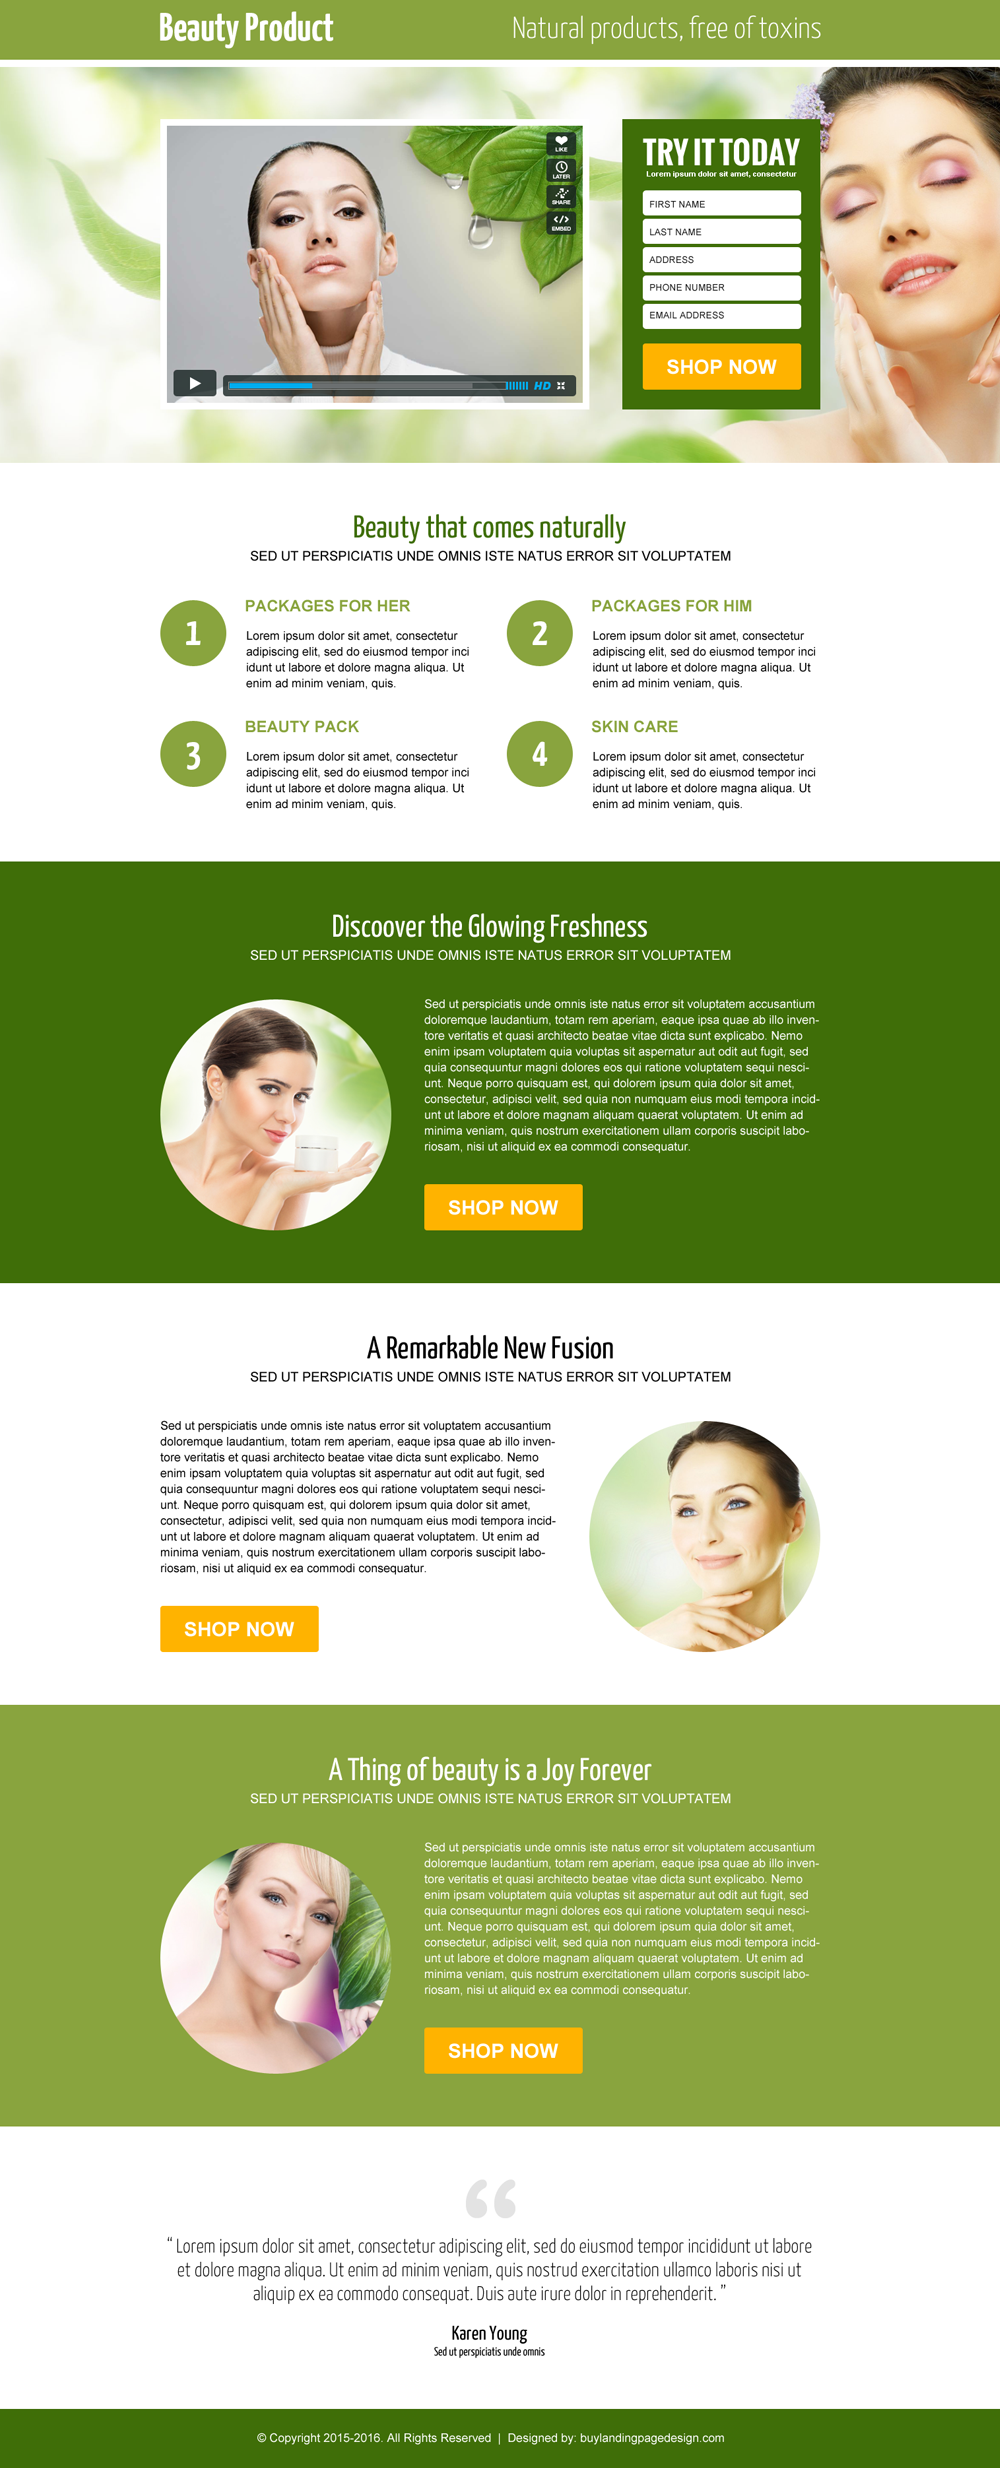 beauty-product-selling-lead-generation-video-landing-page-design-template-018